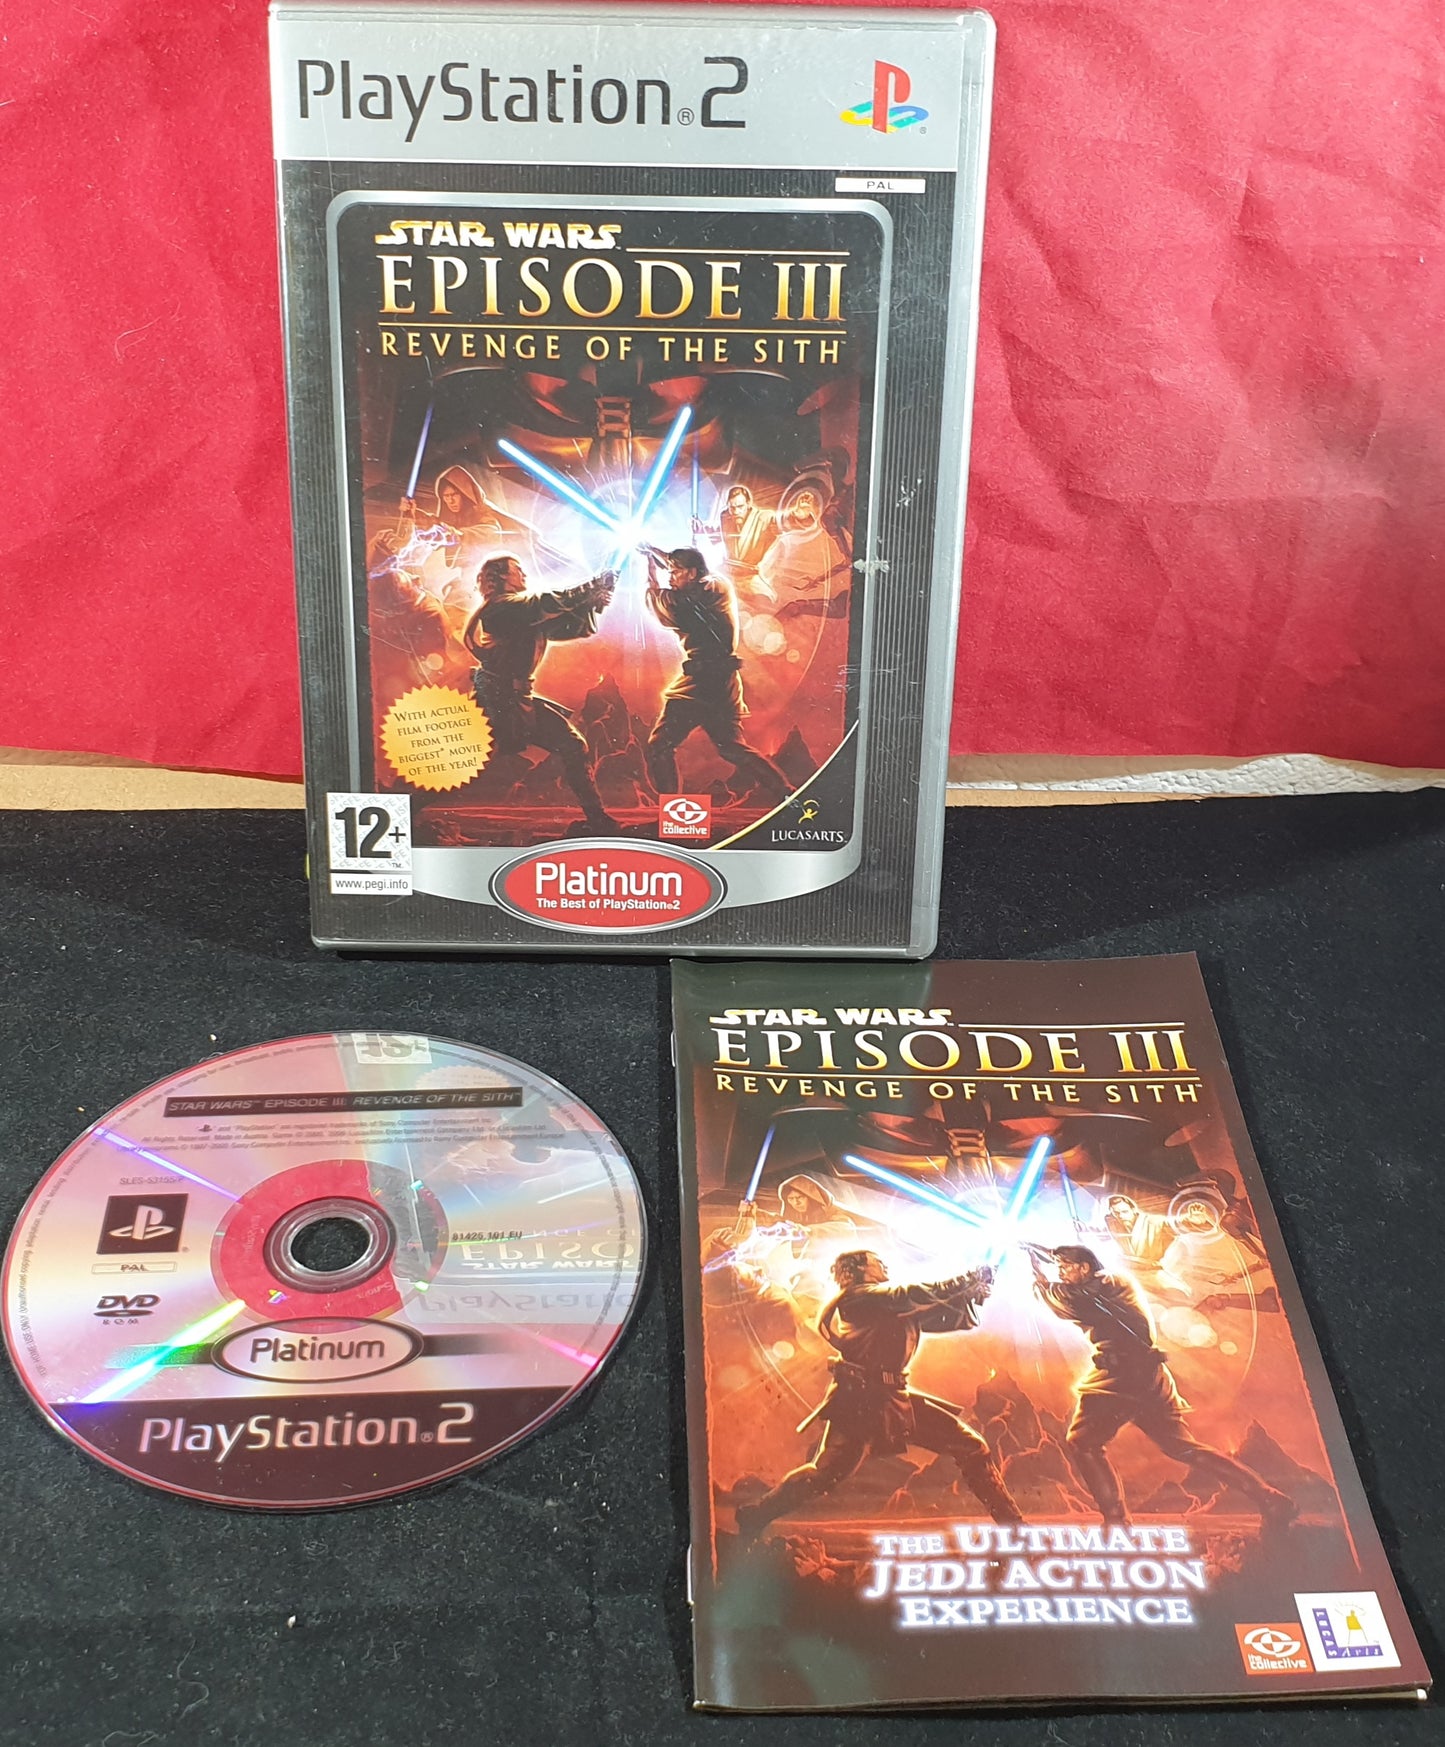 Star Wars Episode III Revenge of the Sith Platinum Sony Playstation 2 (PS2) Game